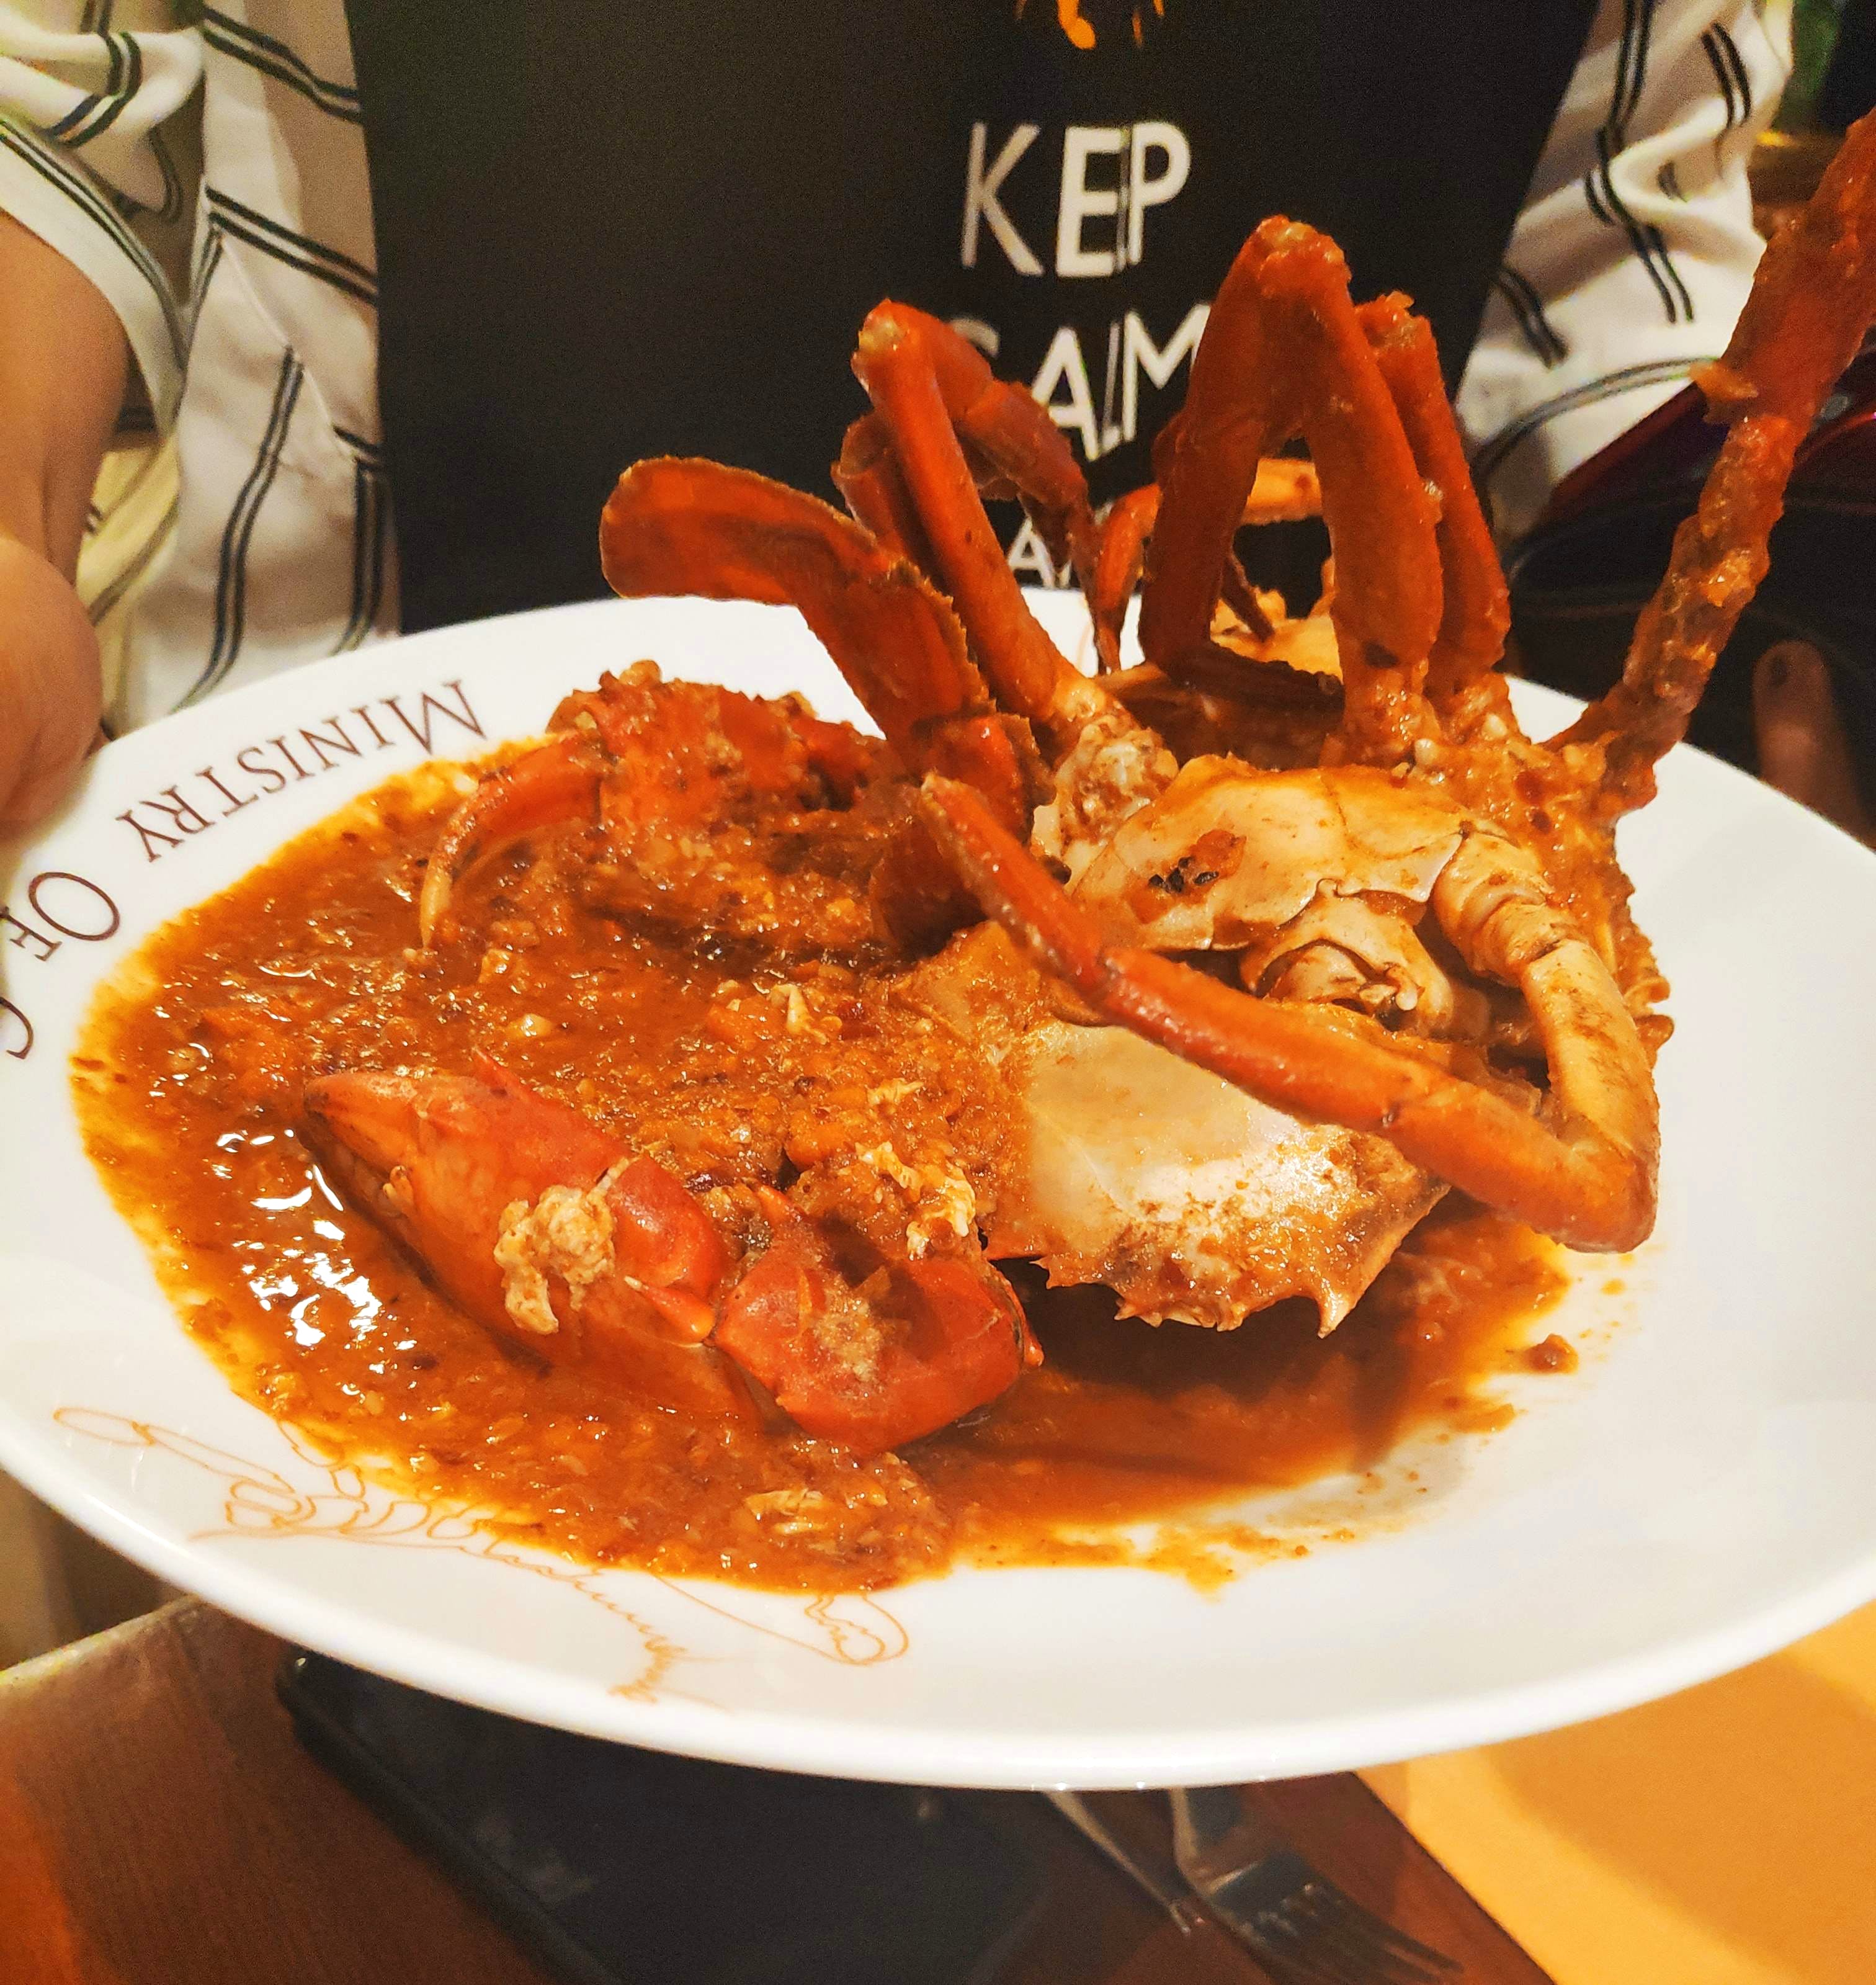 Food,Cuisine,Dish,Crab,Chilli crab,Ingredient,Curry,Gulai,Meat,Seafood